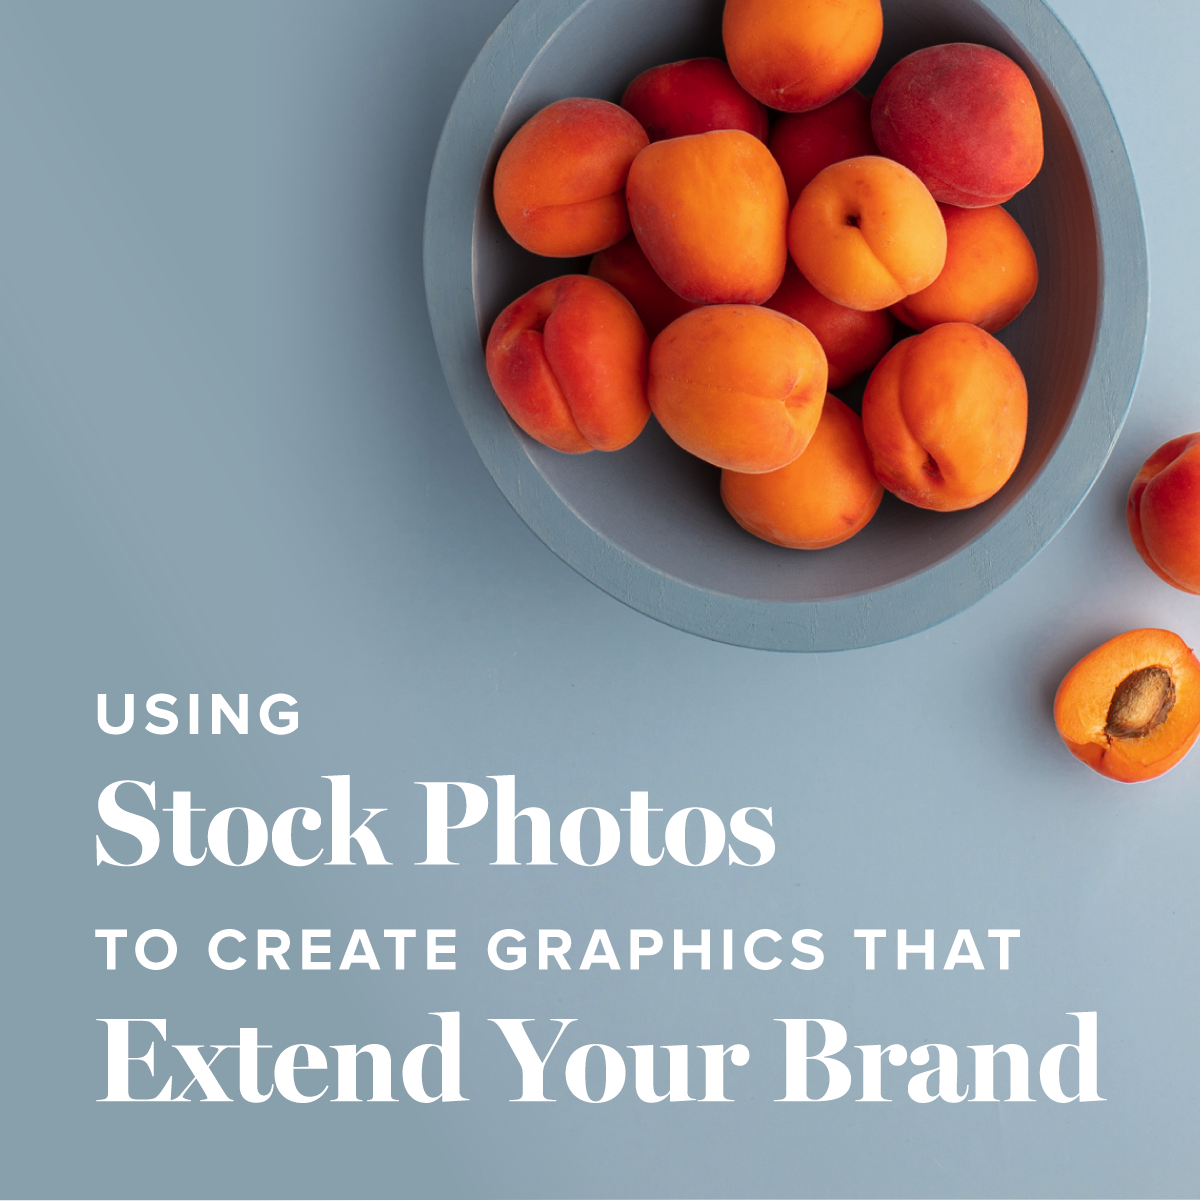 Using Stock Photos to Create Graphics | The Design Lab